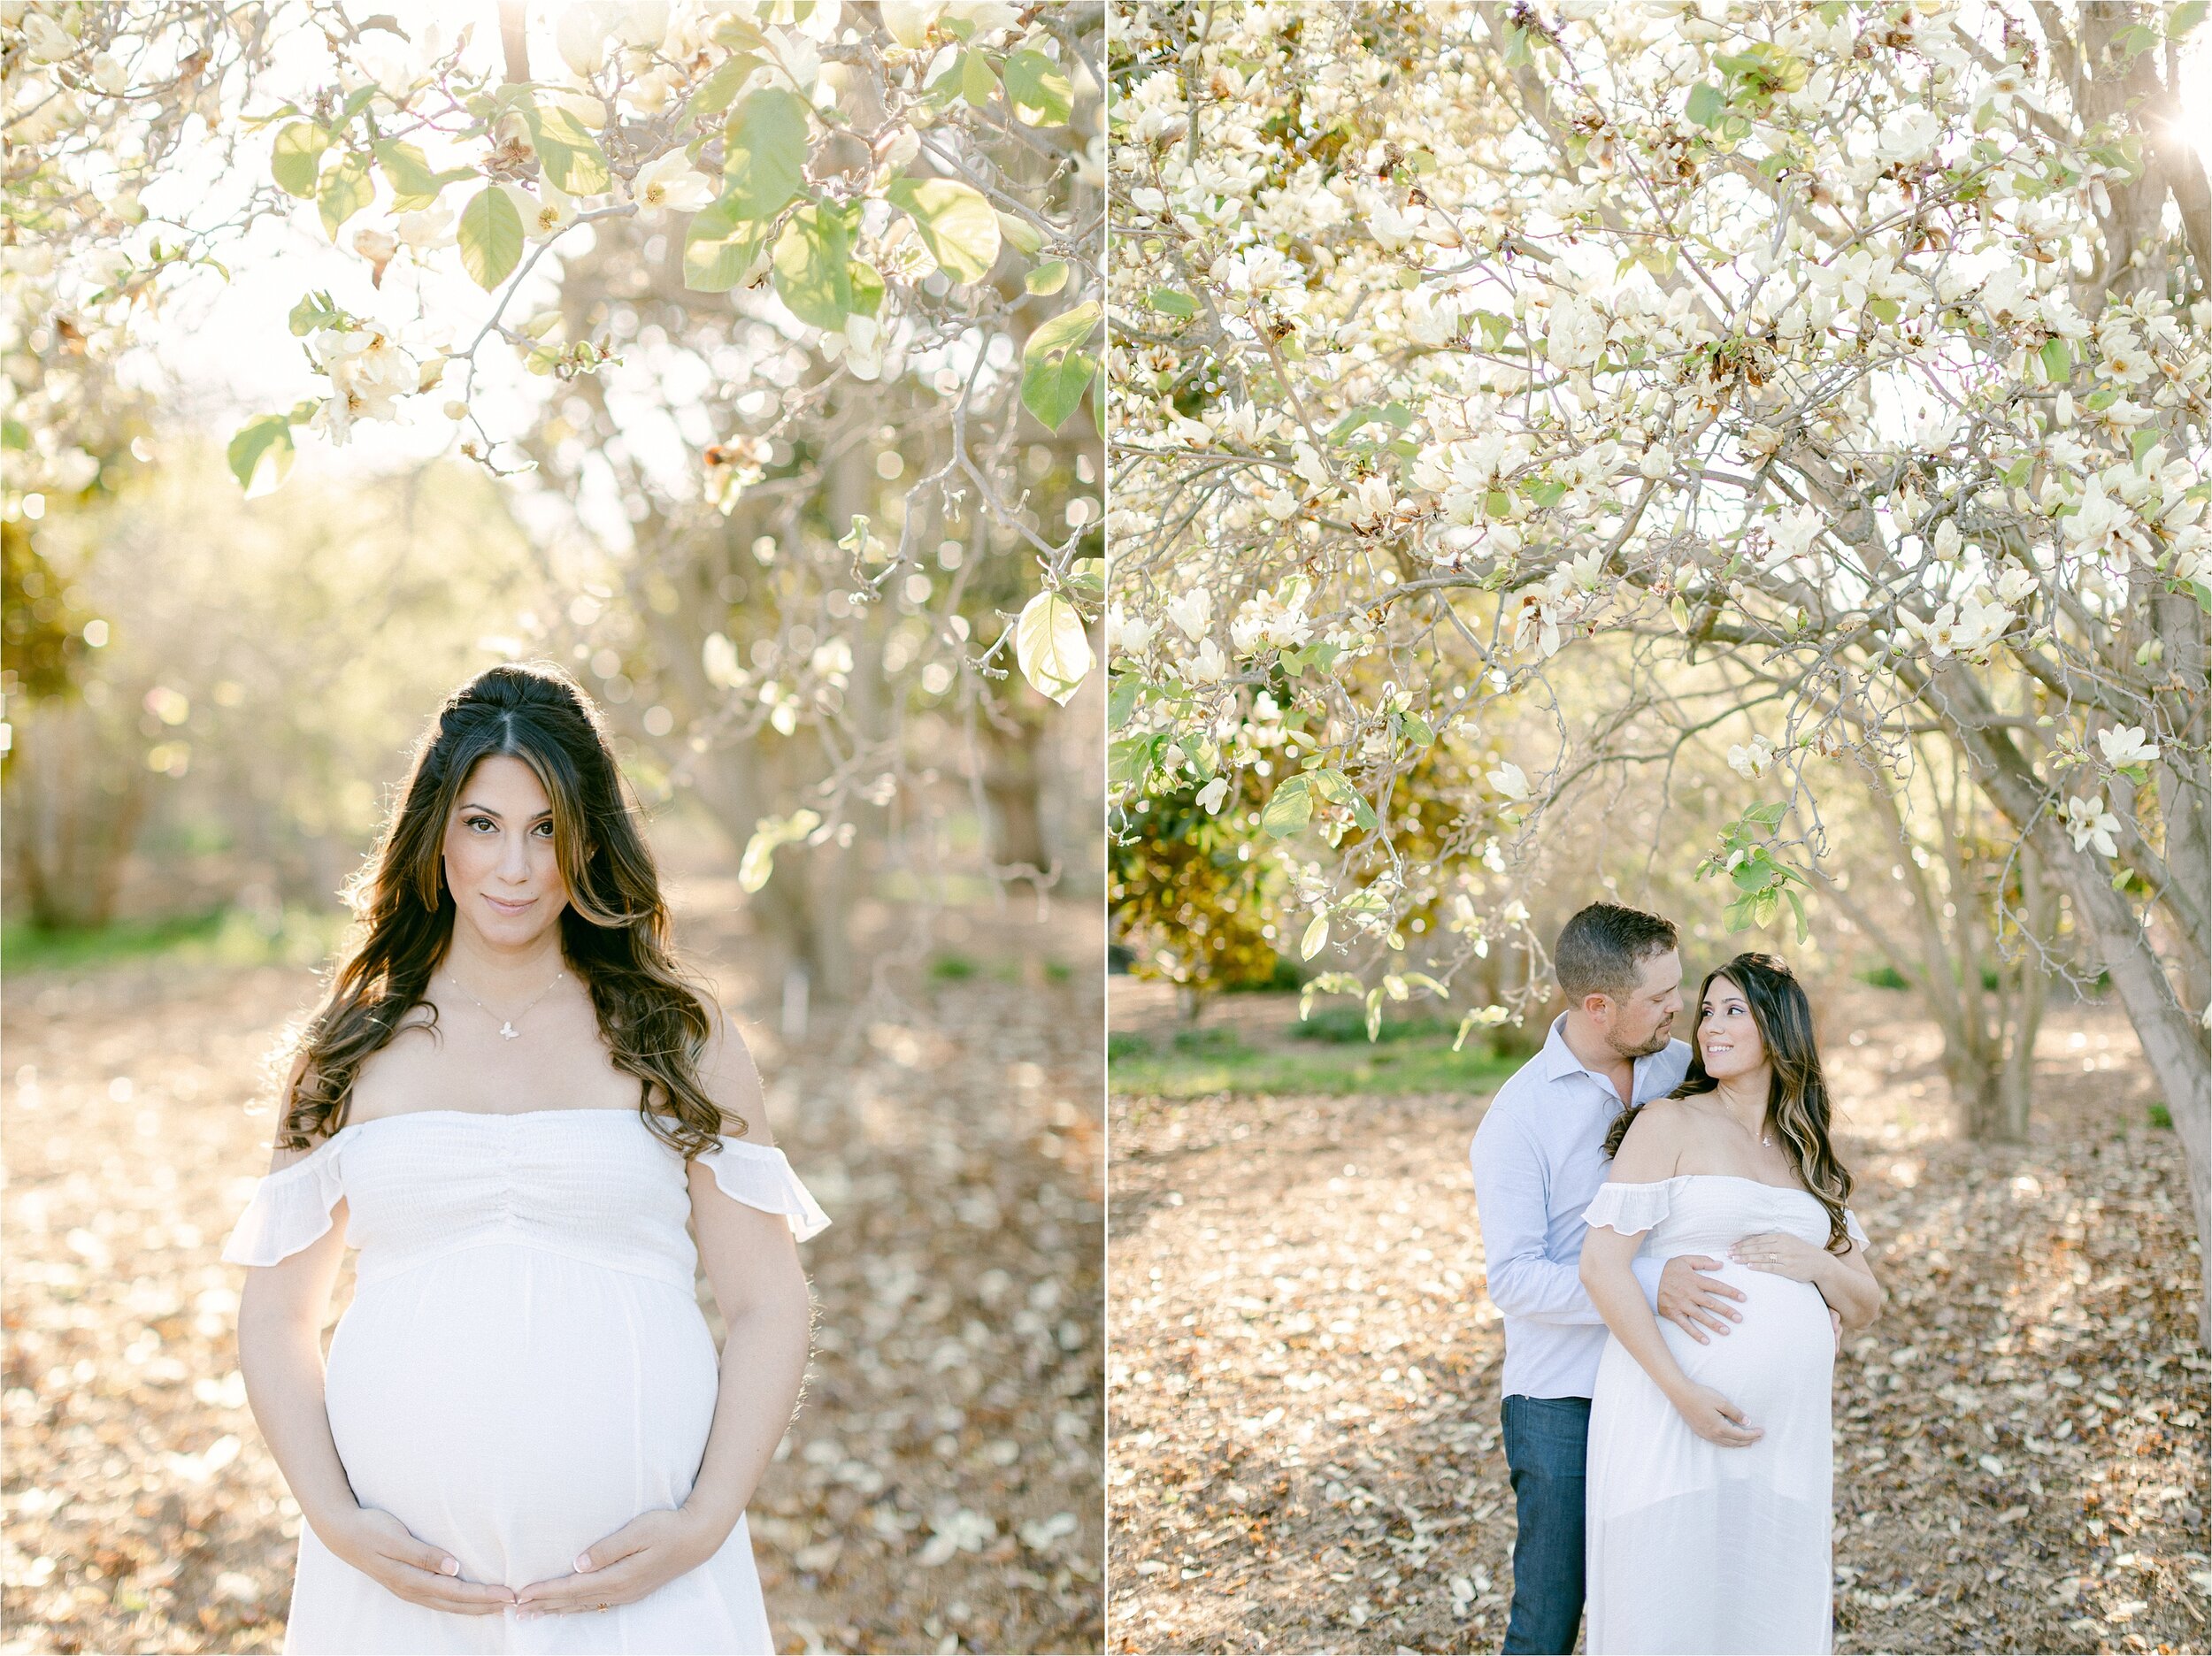 An expectant mother embraces belly while standing under a magnolia tree during floral inspired maternity photos for baby girl